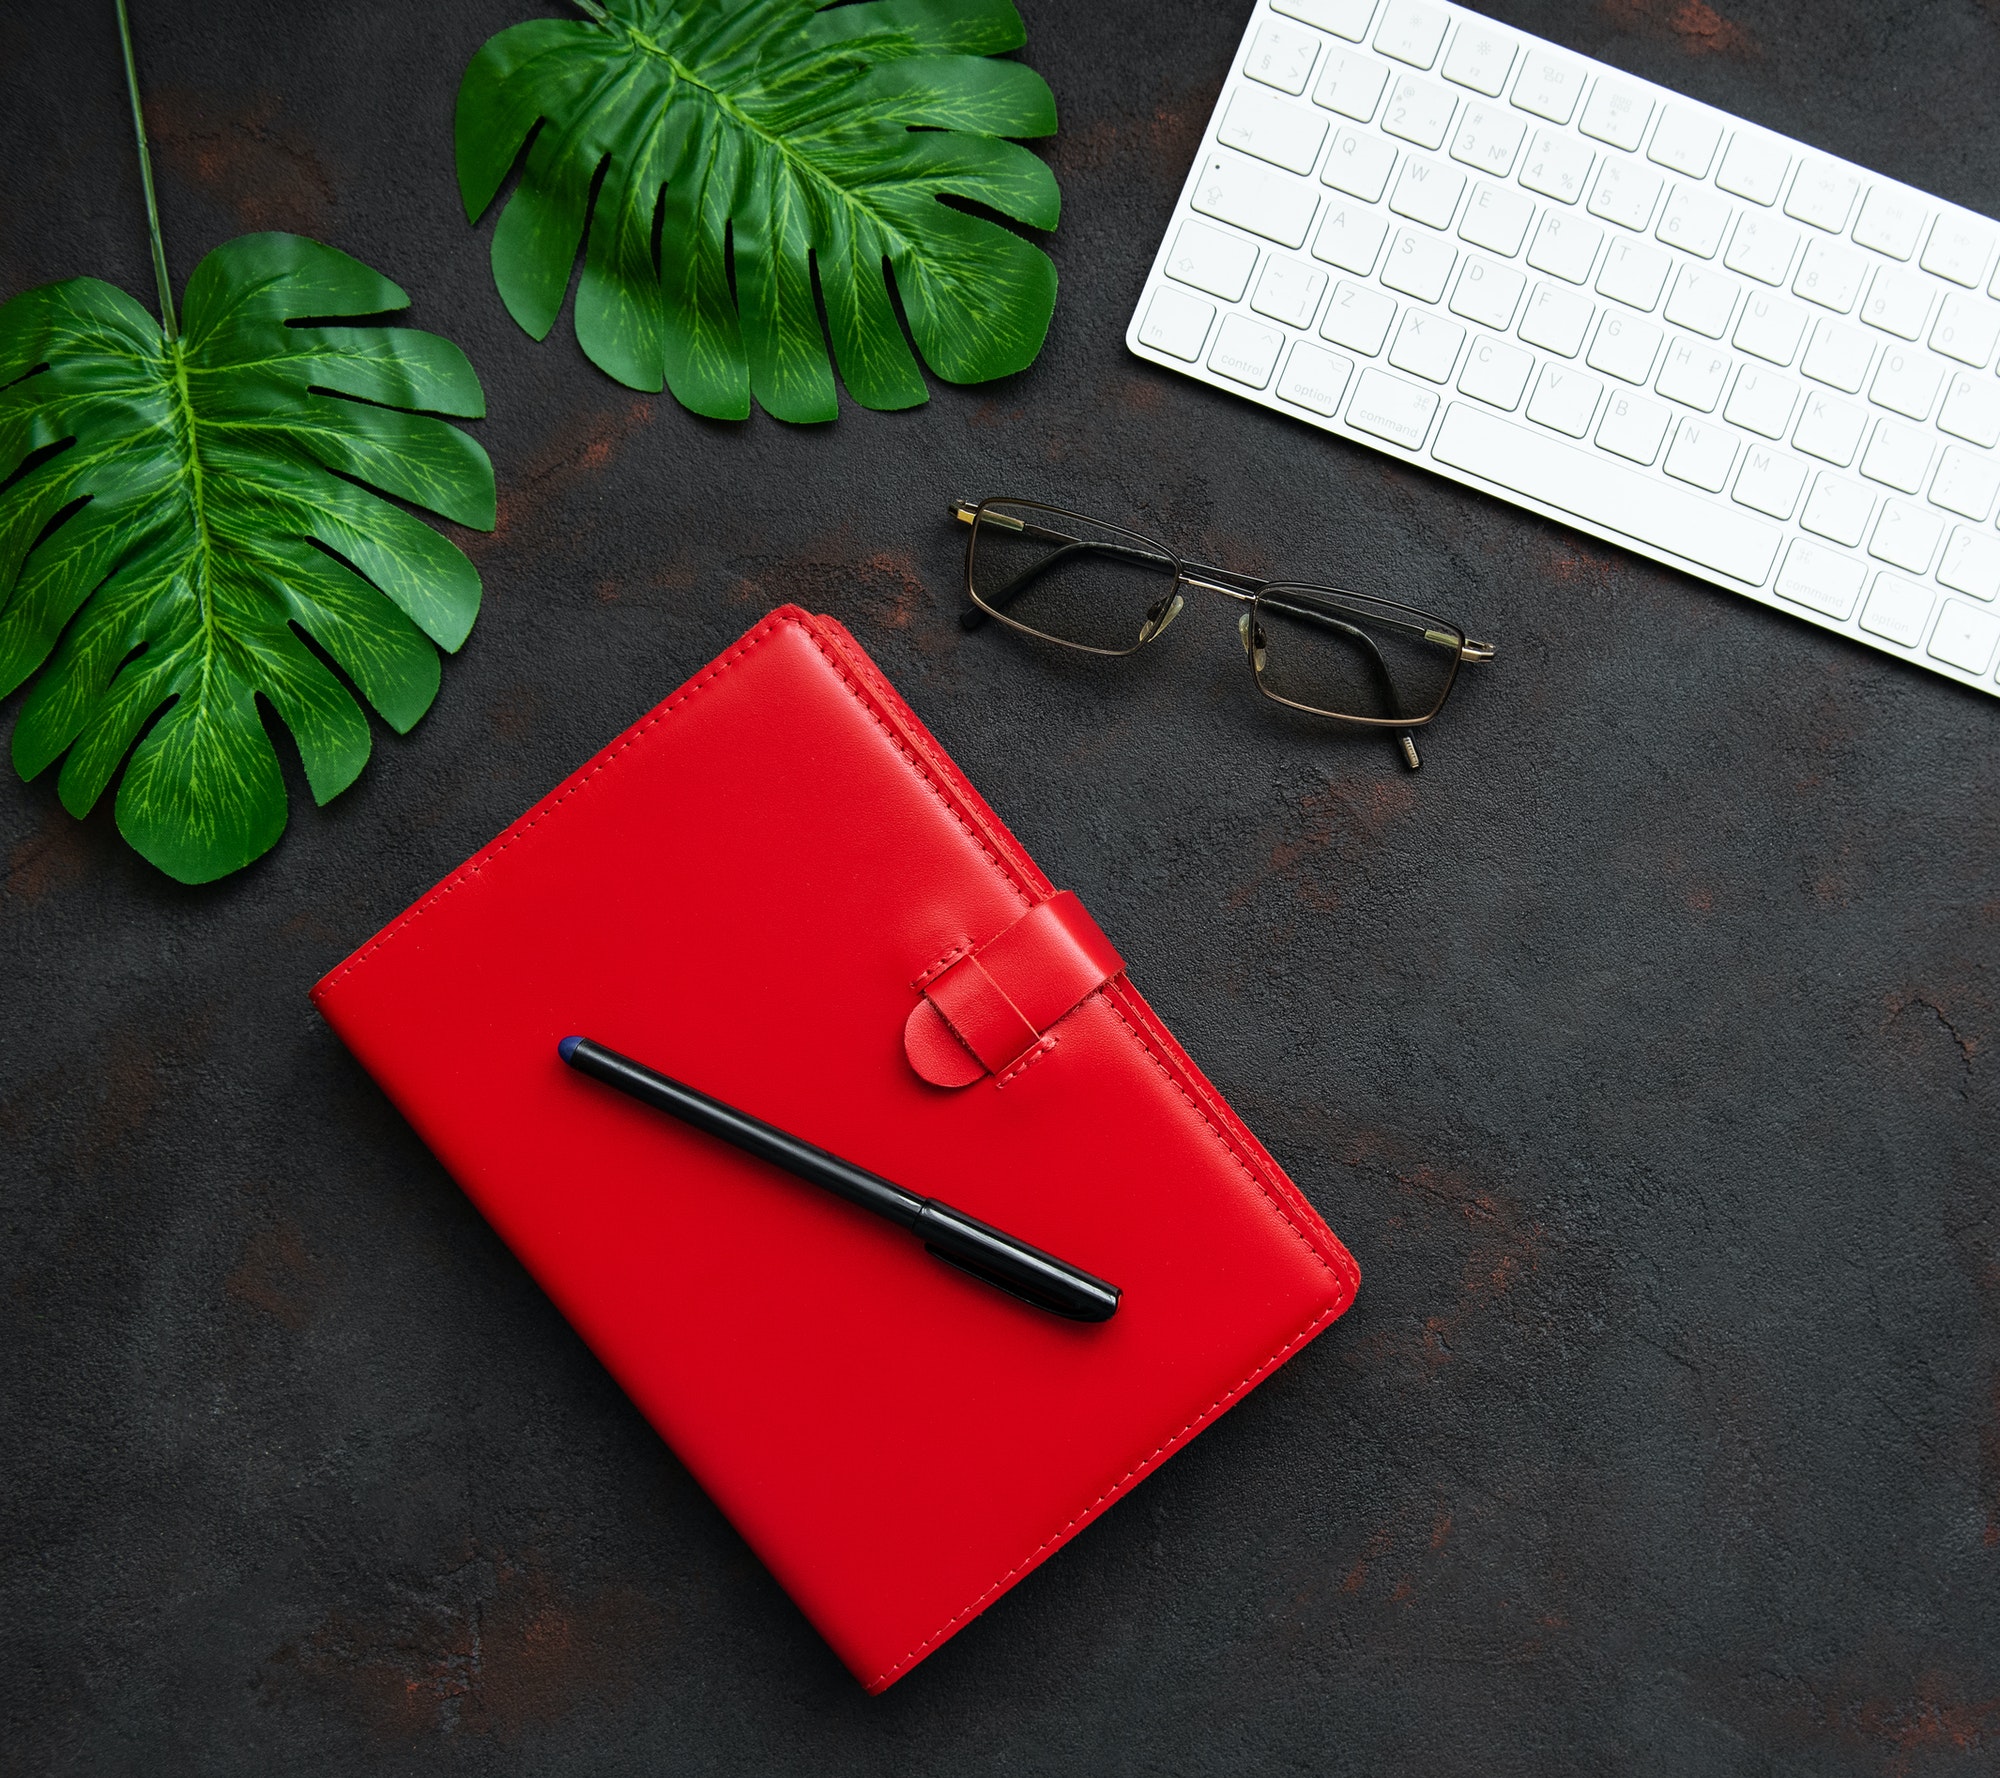 Red notebook and keyboard